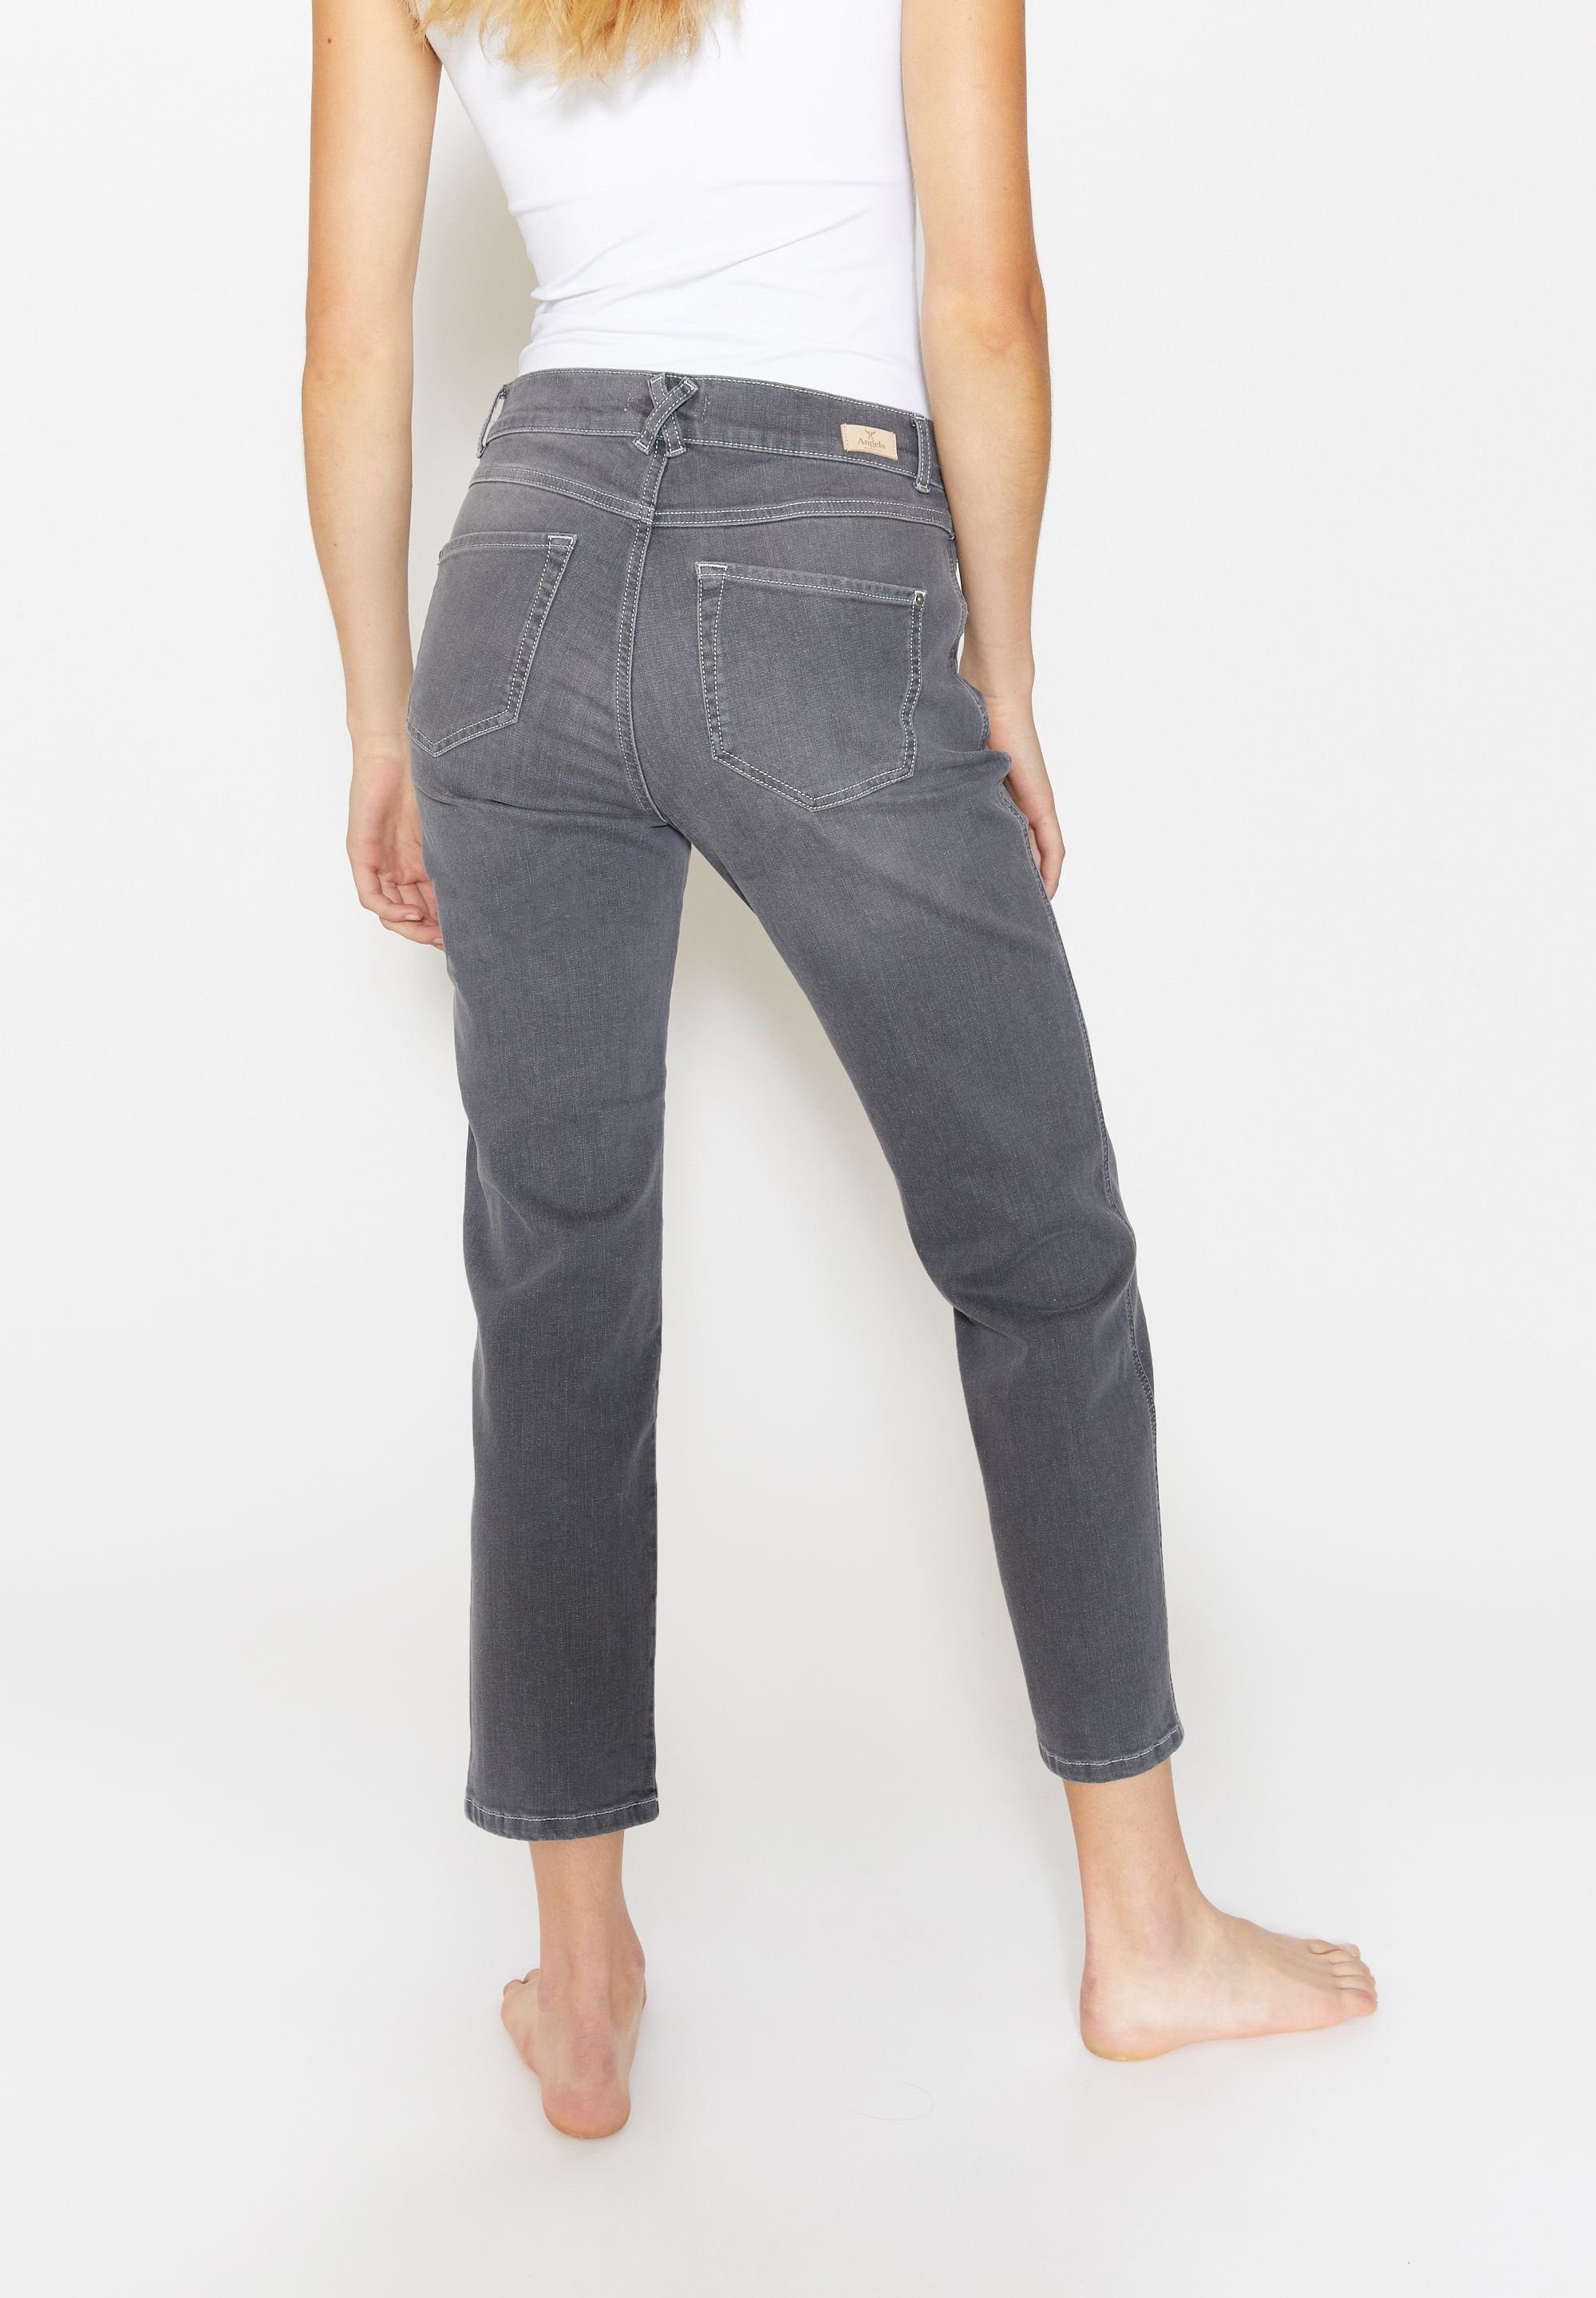 ANGELS Jeans Bequeme